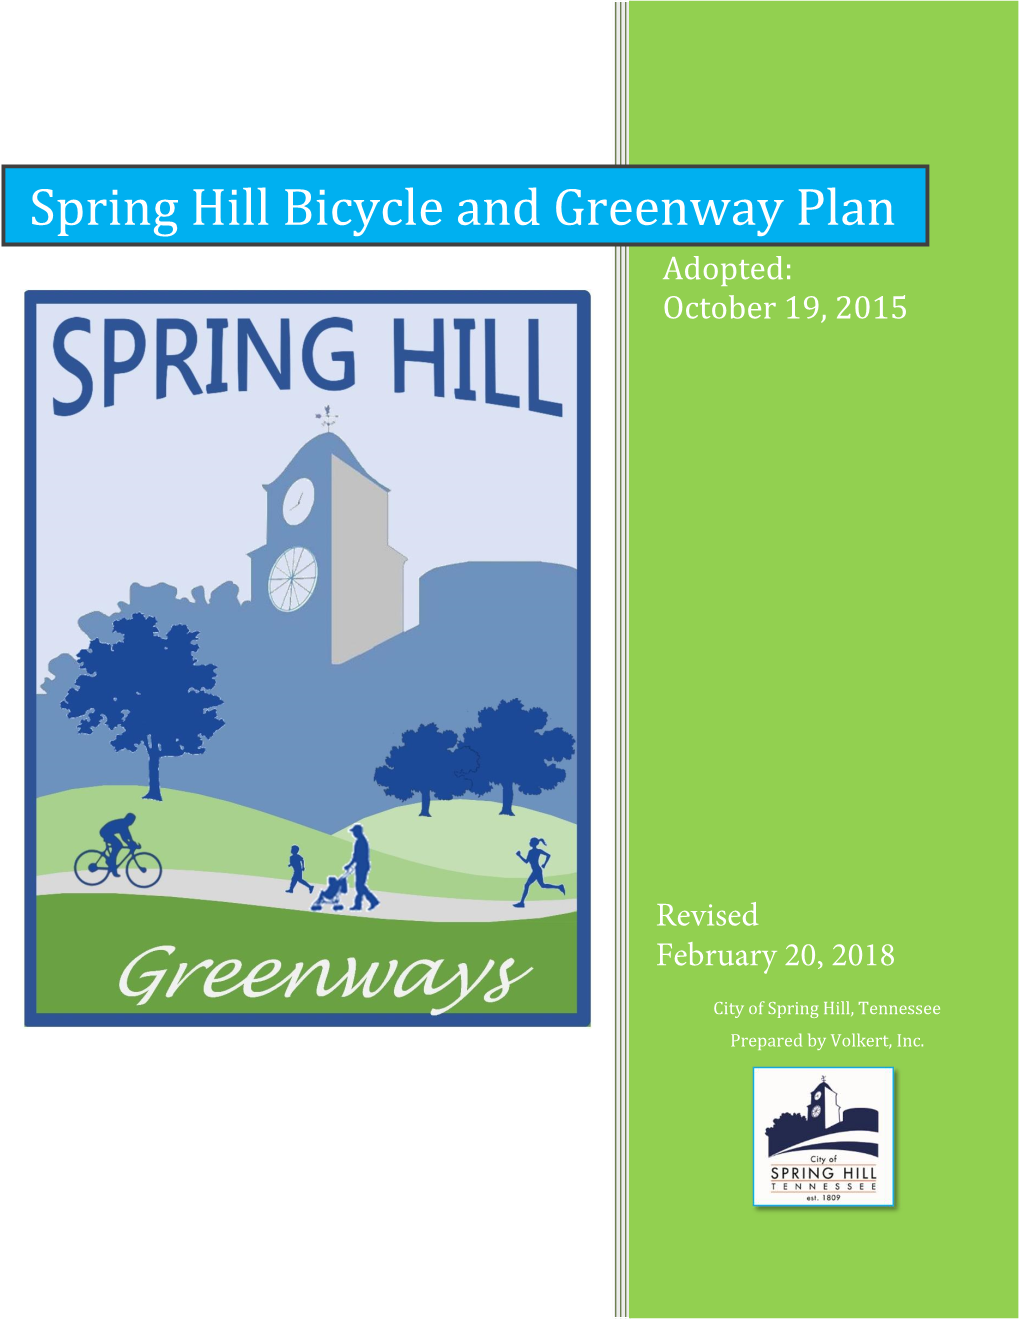 View the Spring Hill Bicycle and Greenway Plan